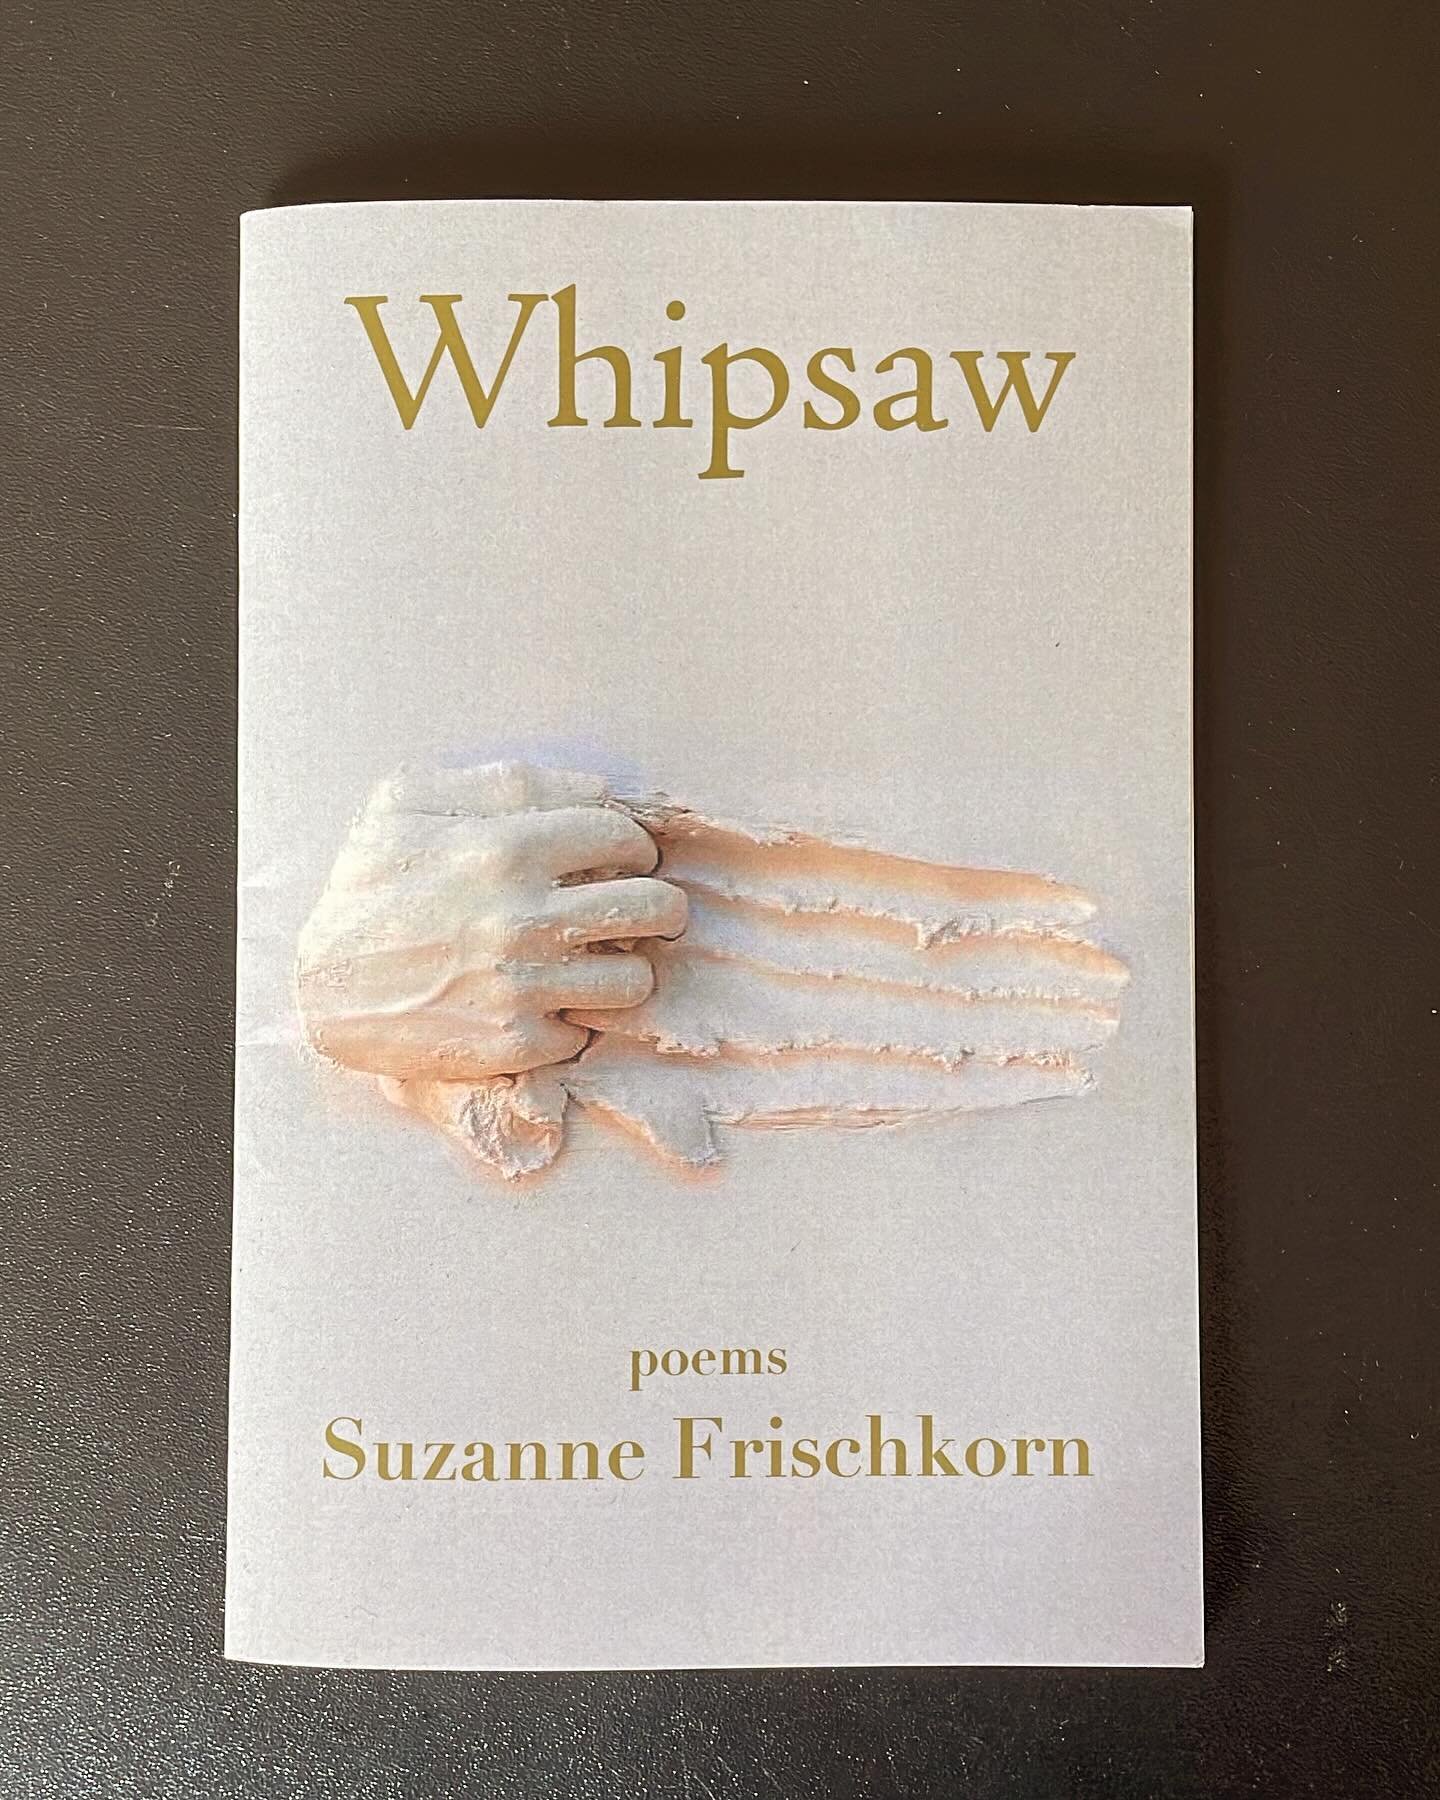 Happy publication day to @suzfrischkorn for Whipsaw - a powerhouse of a book. Highly recommended for National Poetry Month and beyond! 📕✍️💖✨ #poetry #poetrybooks #nationalpoetrymonth